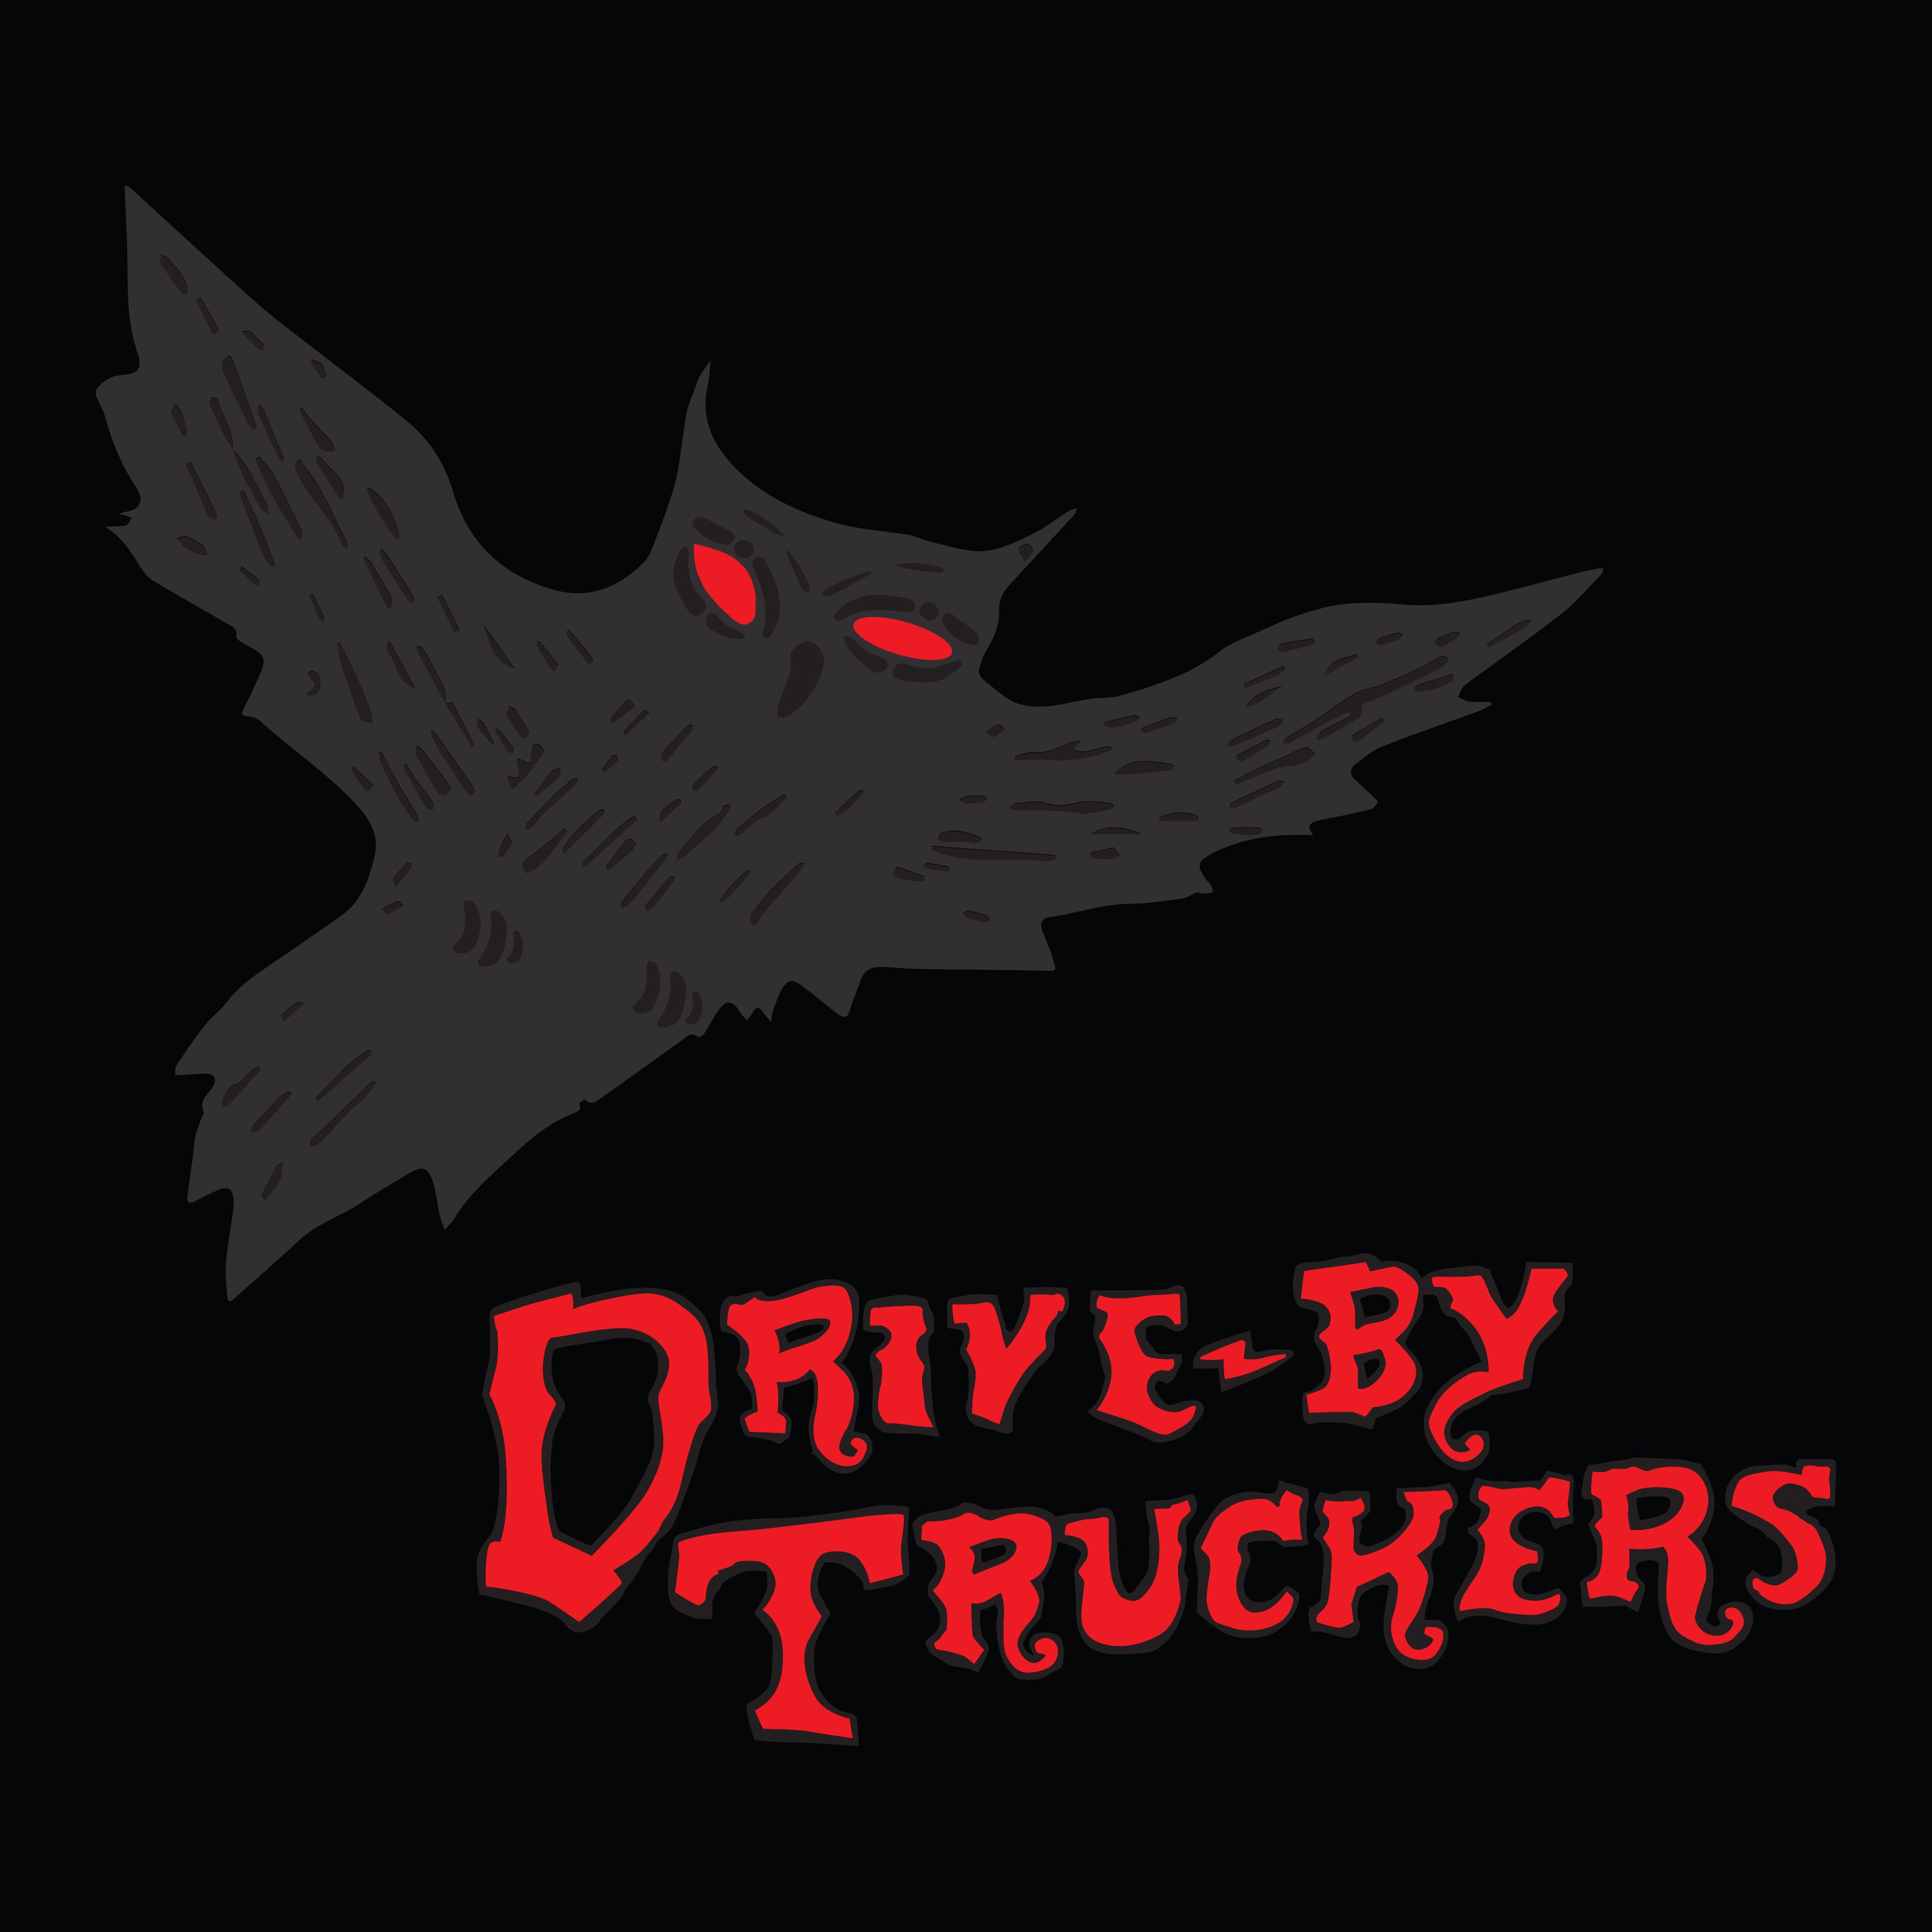 Drive-By Truckers to Release Southern Rock Opera - Deluxe Edition